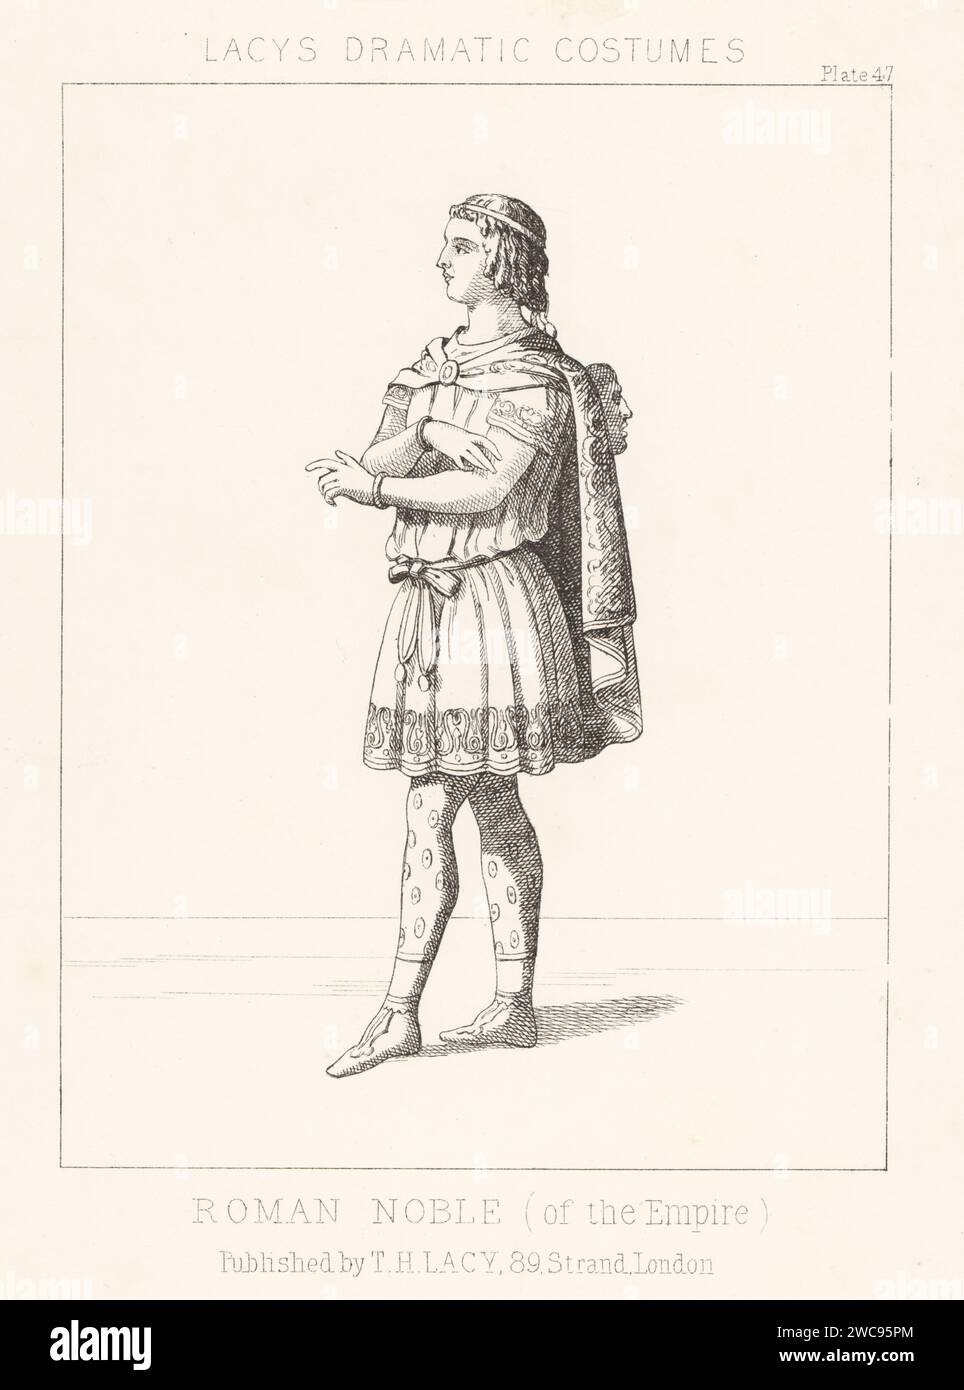 Costume of a noble of the Roman Empire. In diadem, short cloak, colobium (tunic) with cincta (belt), decorated udones (stockings), with mask hanging on his back. Lithograph from Thomas Hailes Lacy's Male Costumes, Historical, National and Dramatic in 200 Plates, London, 1865. Lacy (1809-1873) was a British actor, playwright, theatrical manager and publisher. Stock Photo